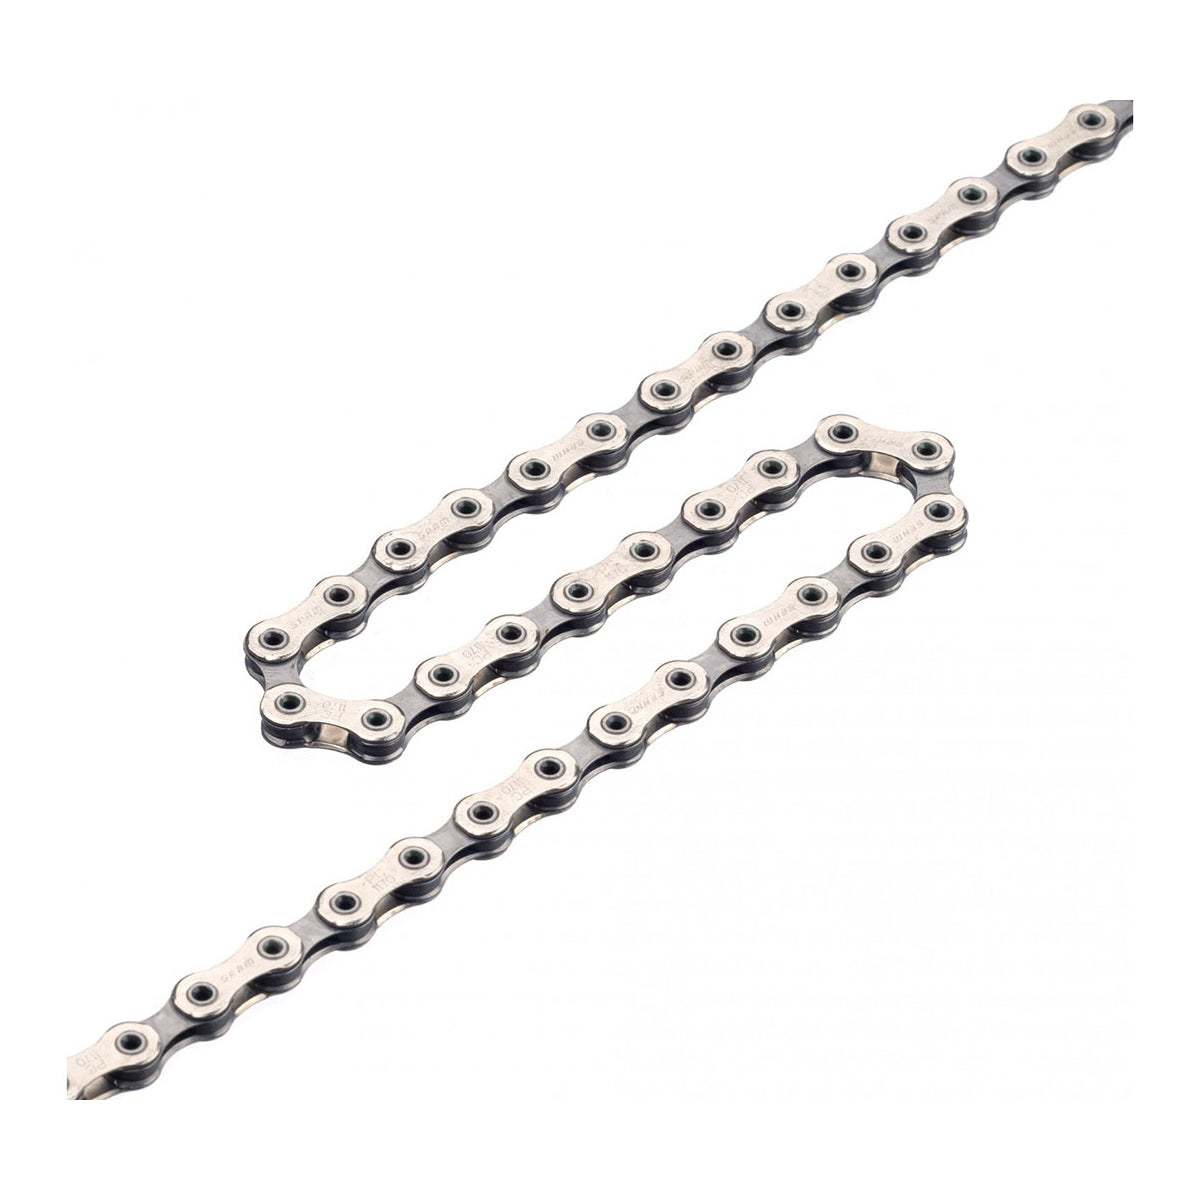 SRAM PC 1170 Hollow Pin Chain - 11 Speed - Silver